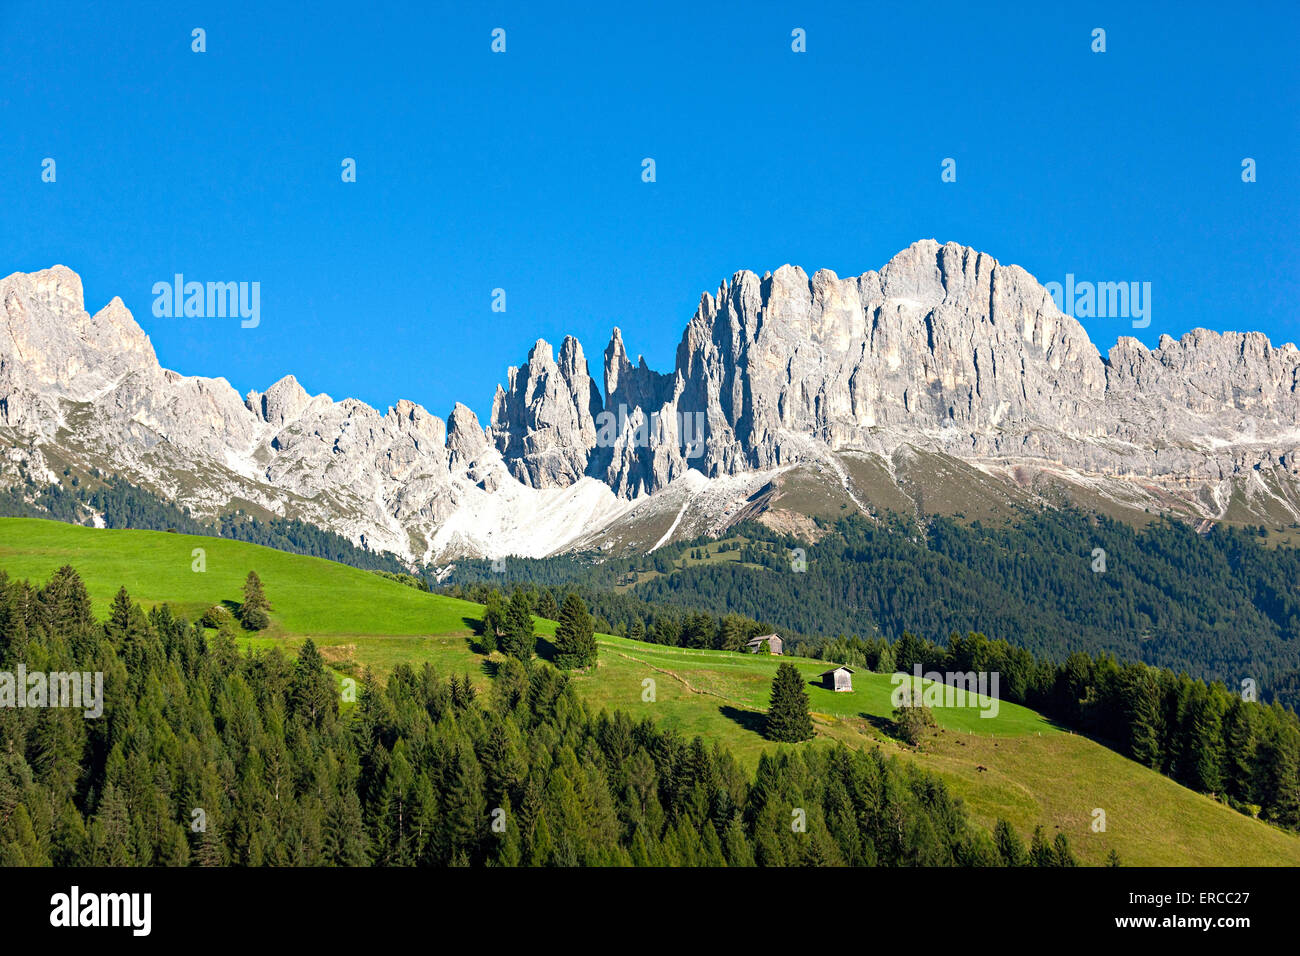 Rose Garden Mountain group, Tiers,Tires, Alto Adige, South Tyrol, Italy ...